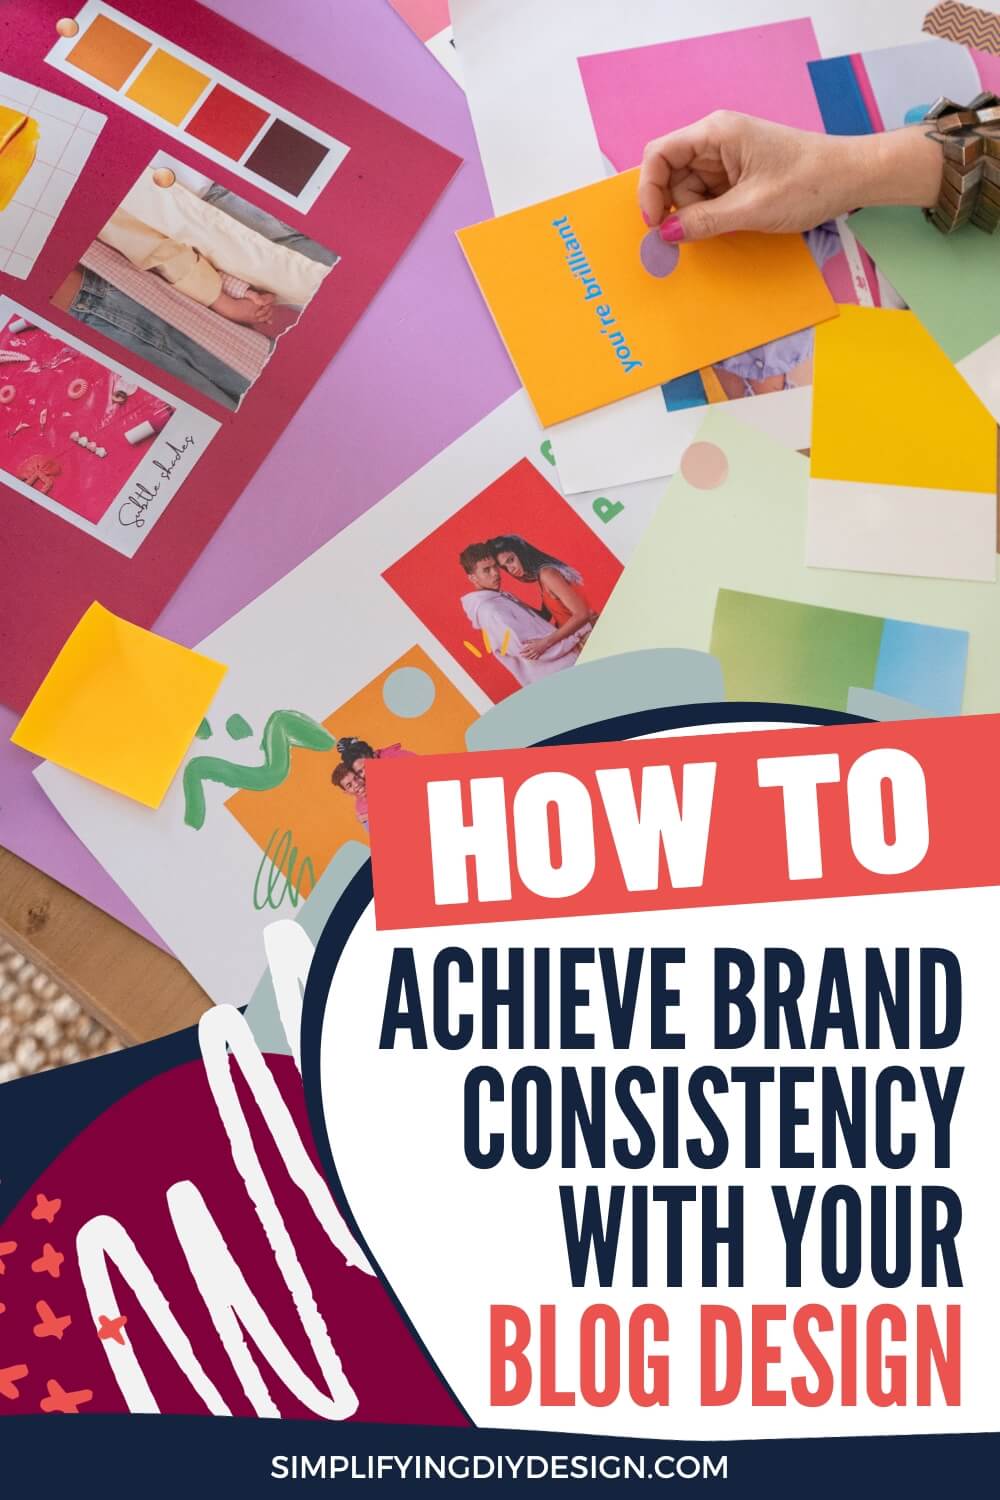 Brand your blog the right way for instant brand recognition. Here's how to achieve brand consistency with your blog to build confidence with your readers!